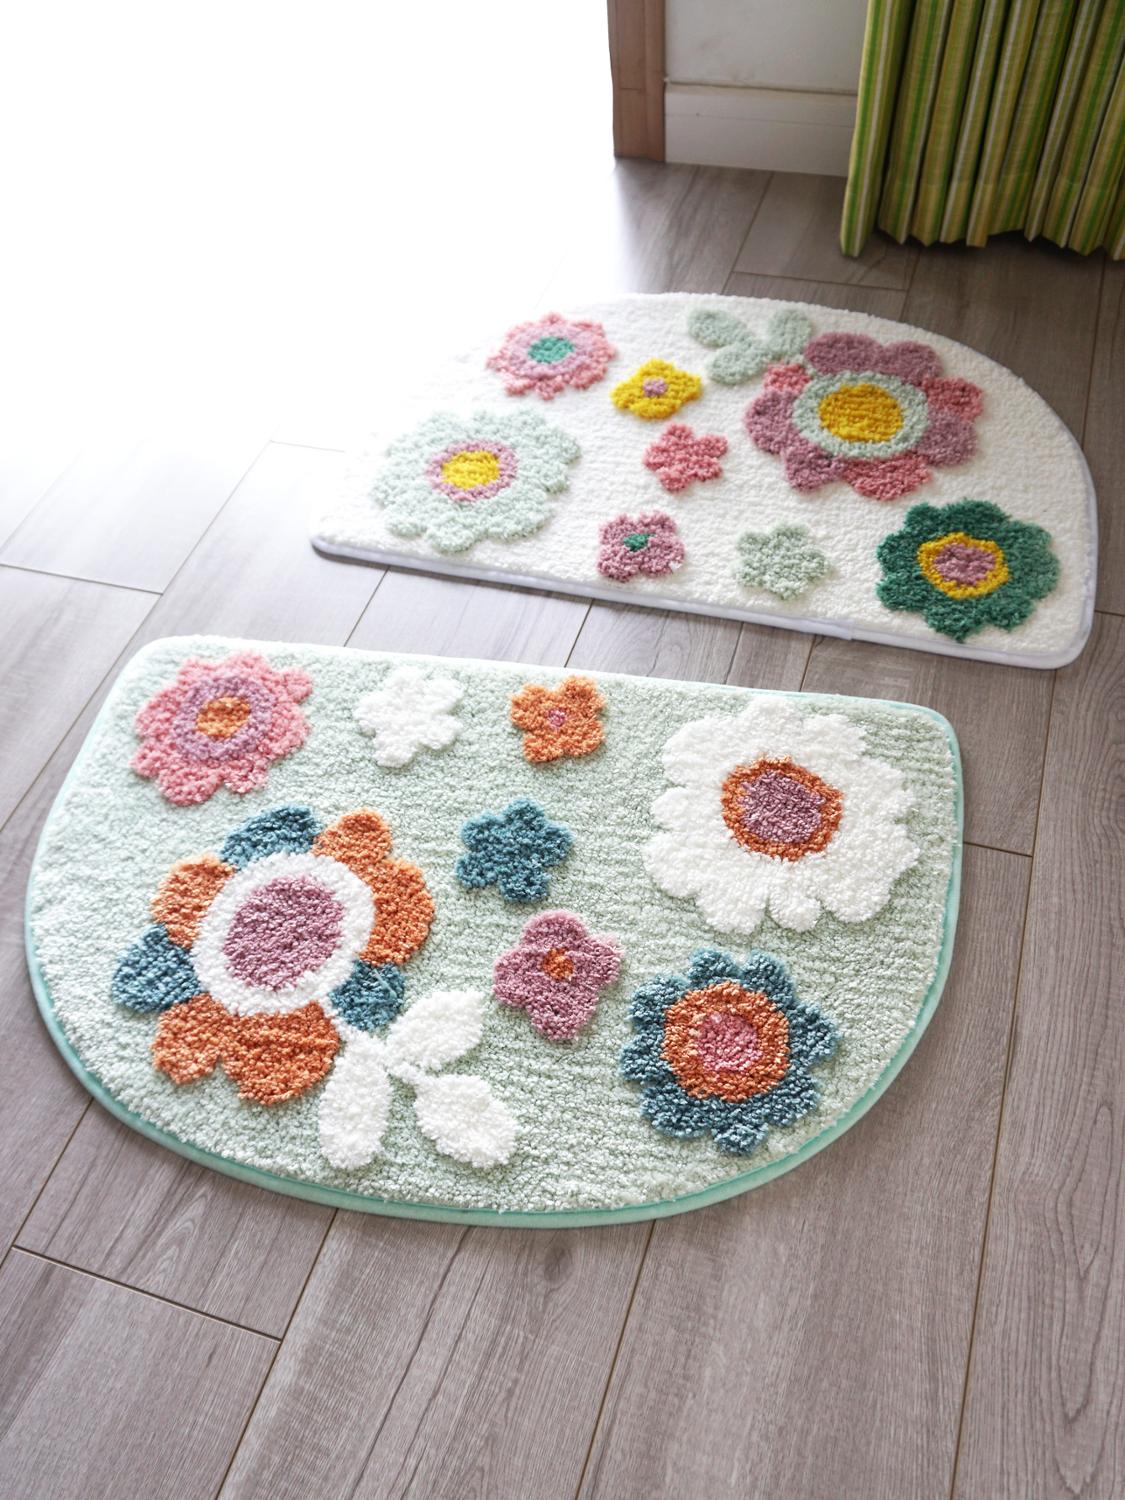 Carpets For Living Room Flower Printed Parlor Bedroom Chair Rugs Toilet Bath Decorate Non-slip Door Bath Mat